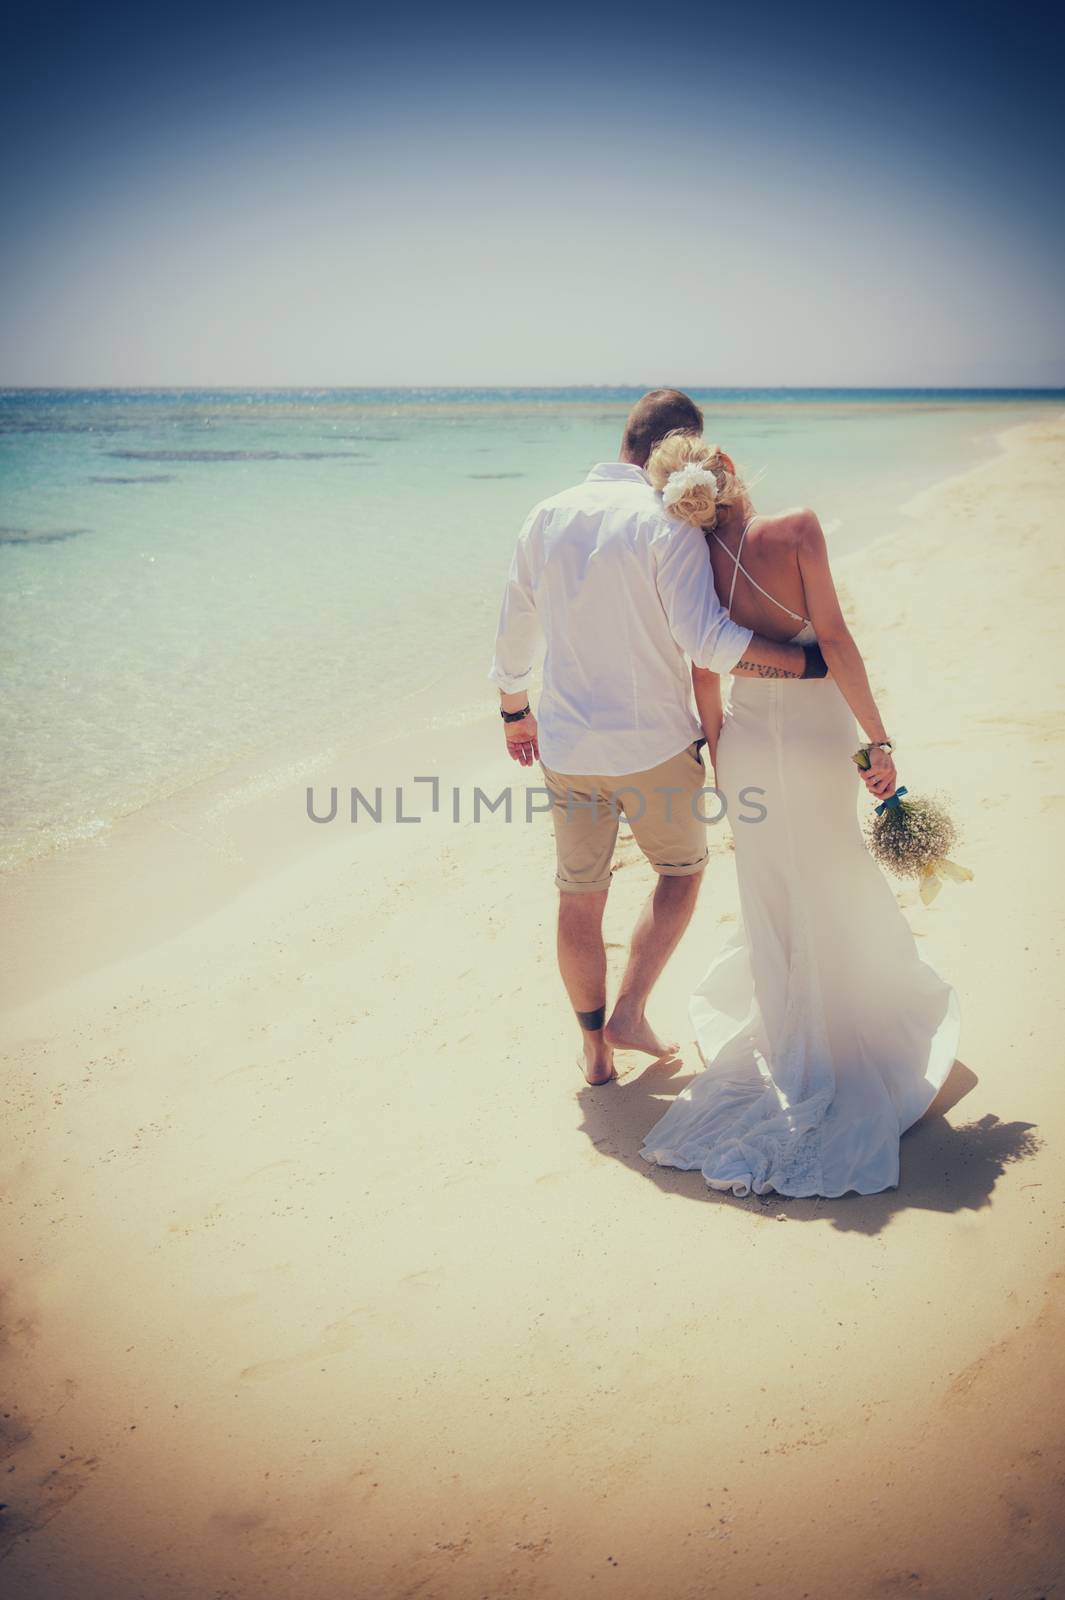 Beautiful couple holding each other at a tropical beach paradise on wedding day in white gown dress with ocean view vintage style photo